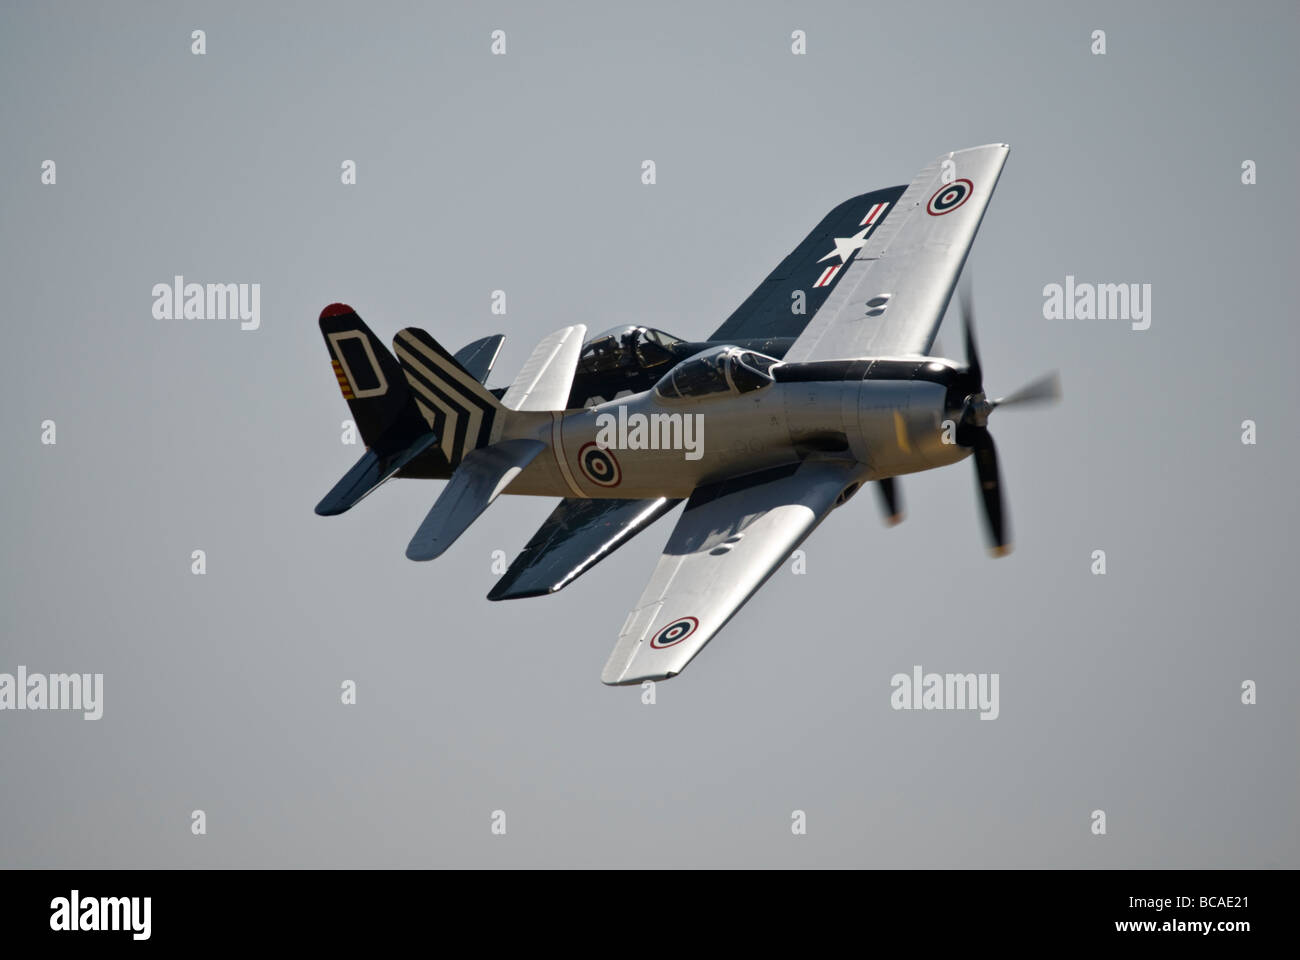 Two Grumman F8F Bearcats fly in formation at an air show. Stock Photo